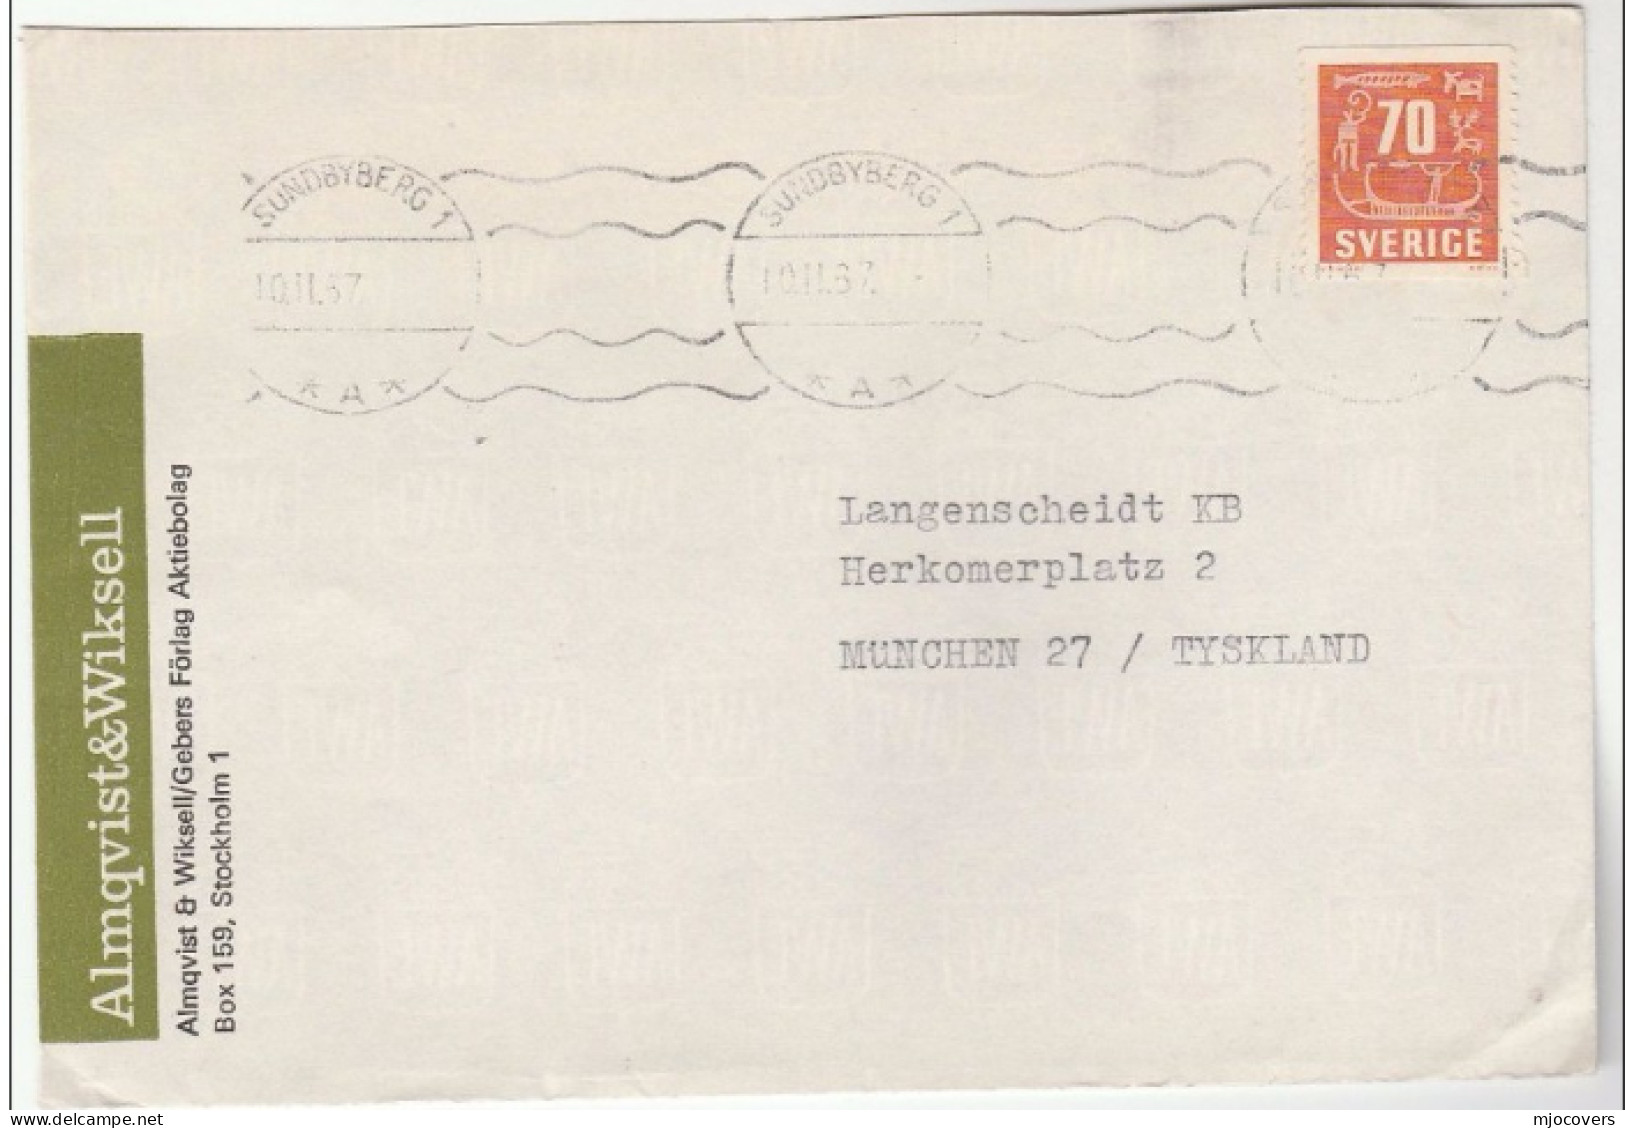 1967 SWEDEN Sundbyberg ADVERT COVER To Germany, Stamps - Storia Postale